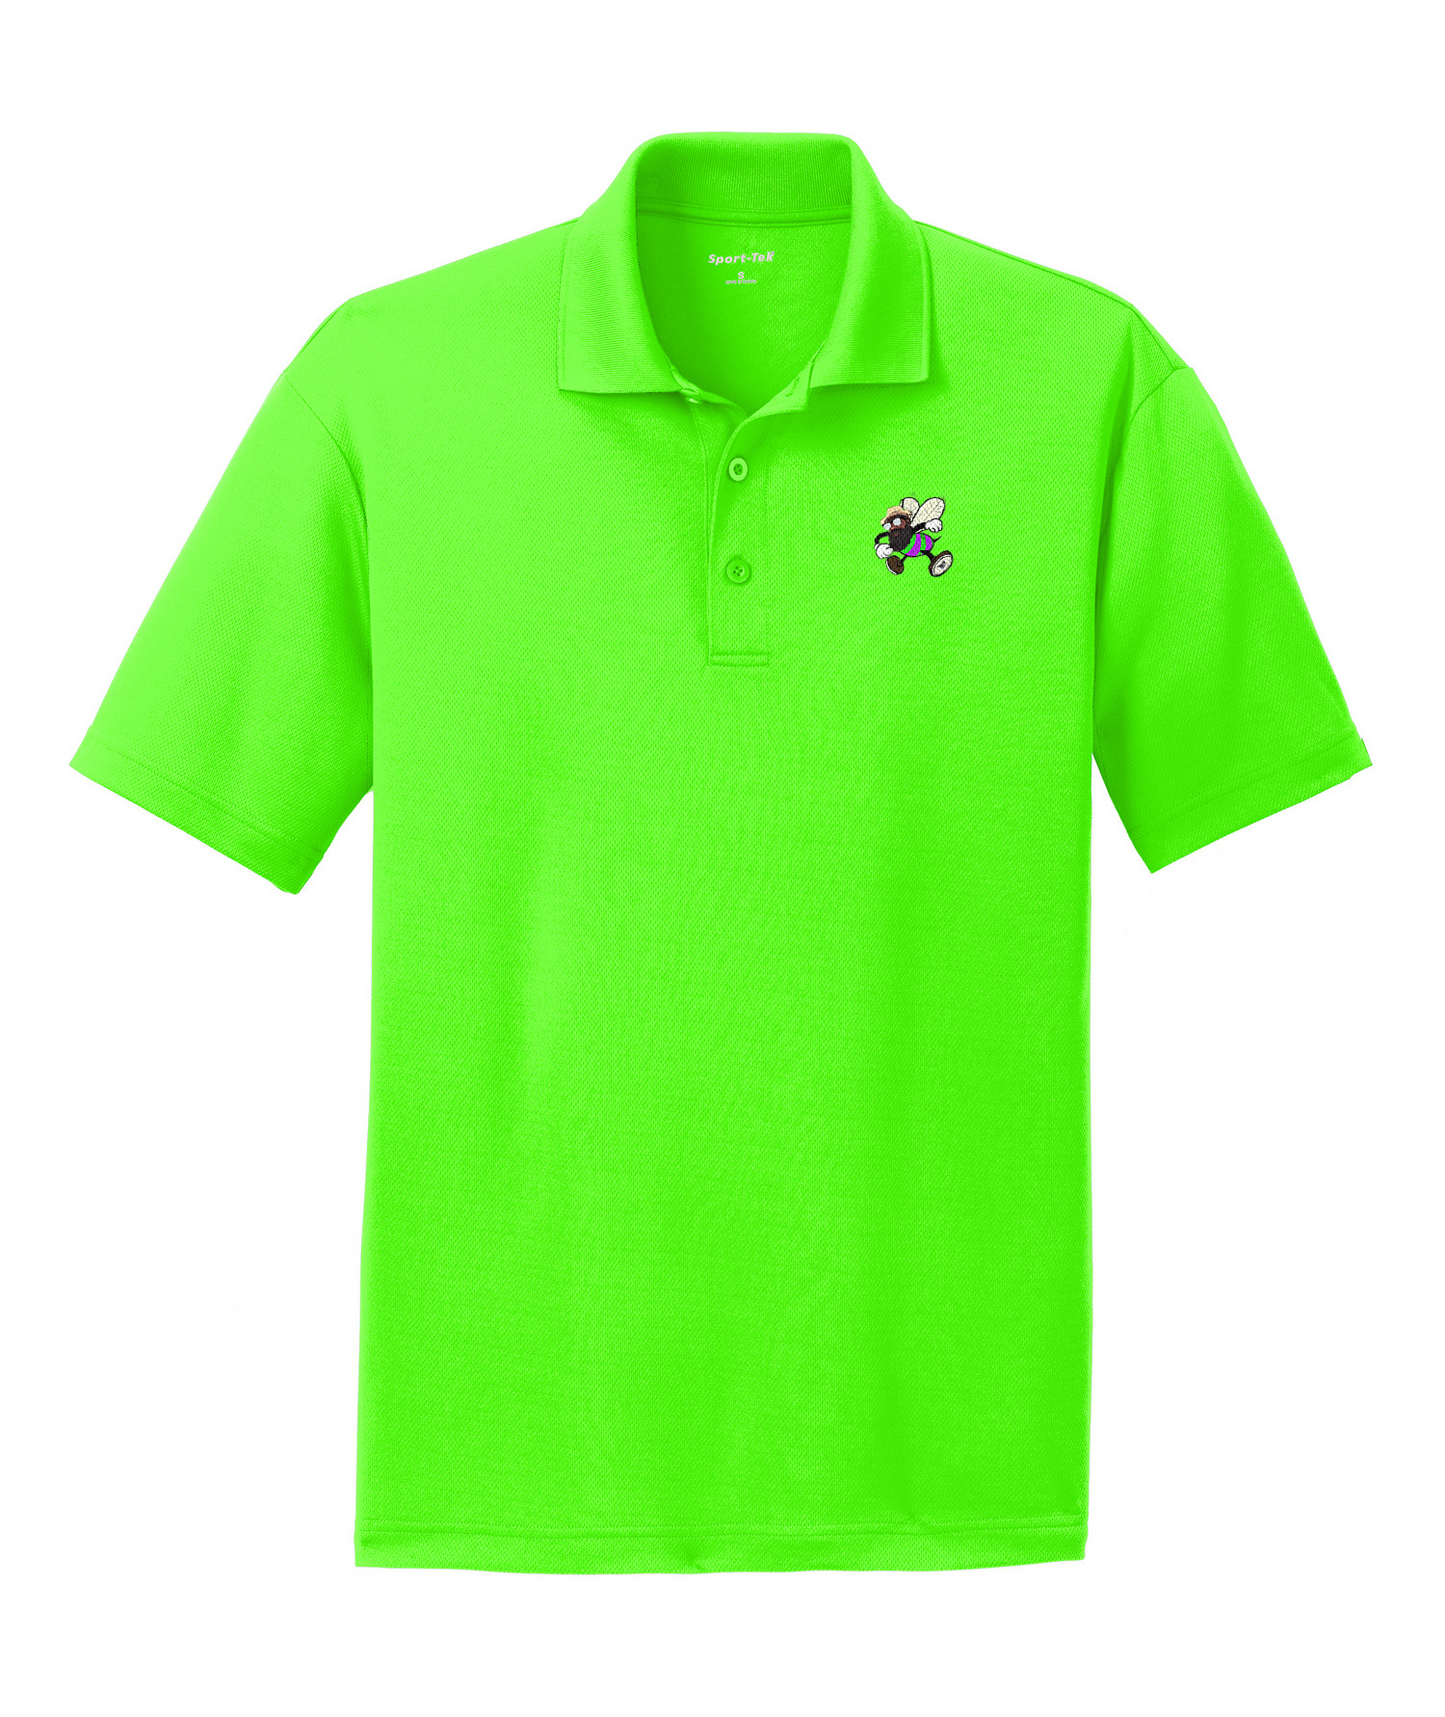 Be Who You Bee Embroidered Men's Ultrafine Mesh Polo or Similar